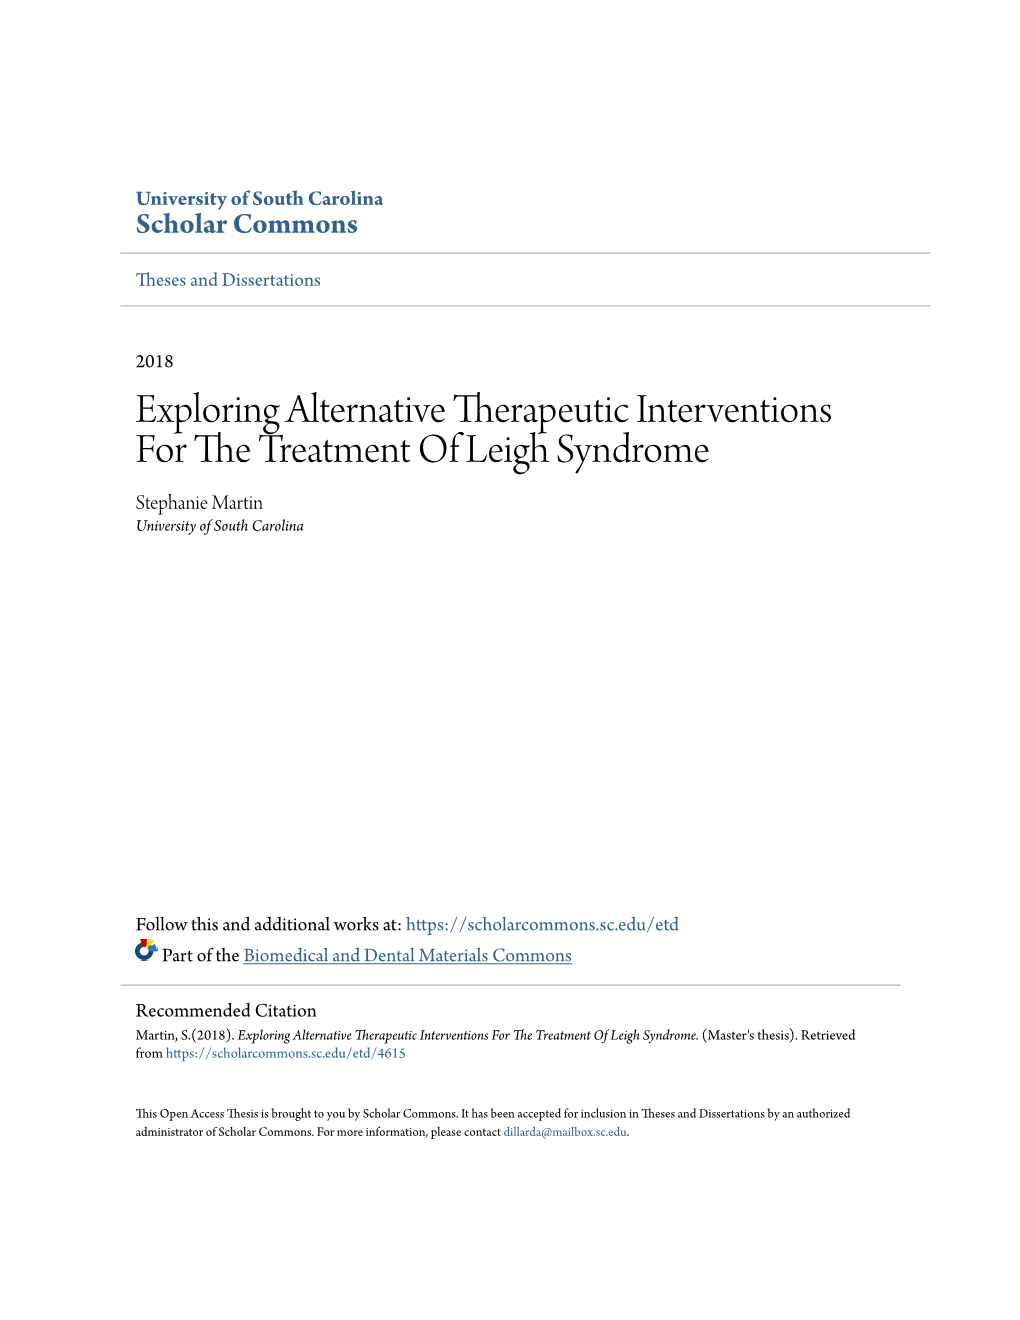 Exploring Alternative Therapeutic Interventions for the Treatment of Leigh Syndrome